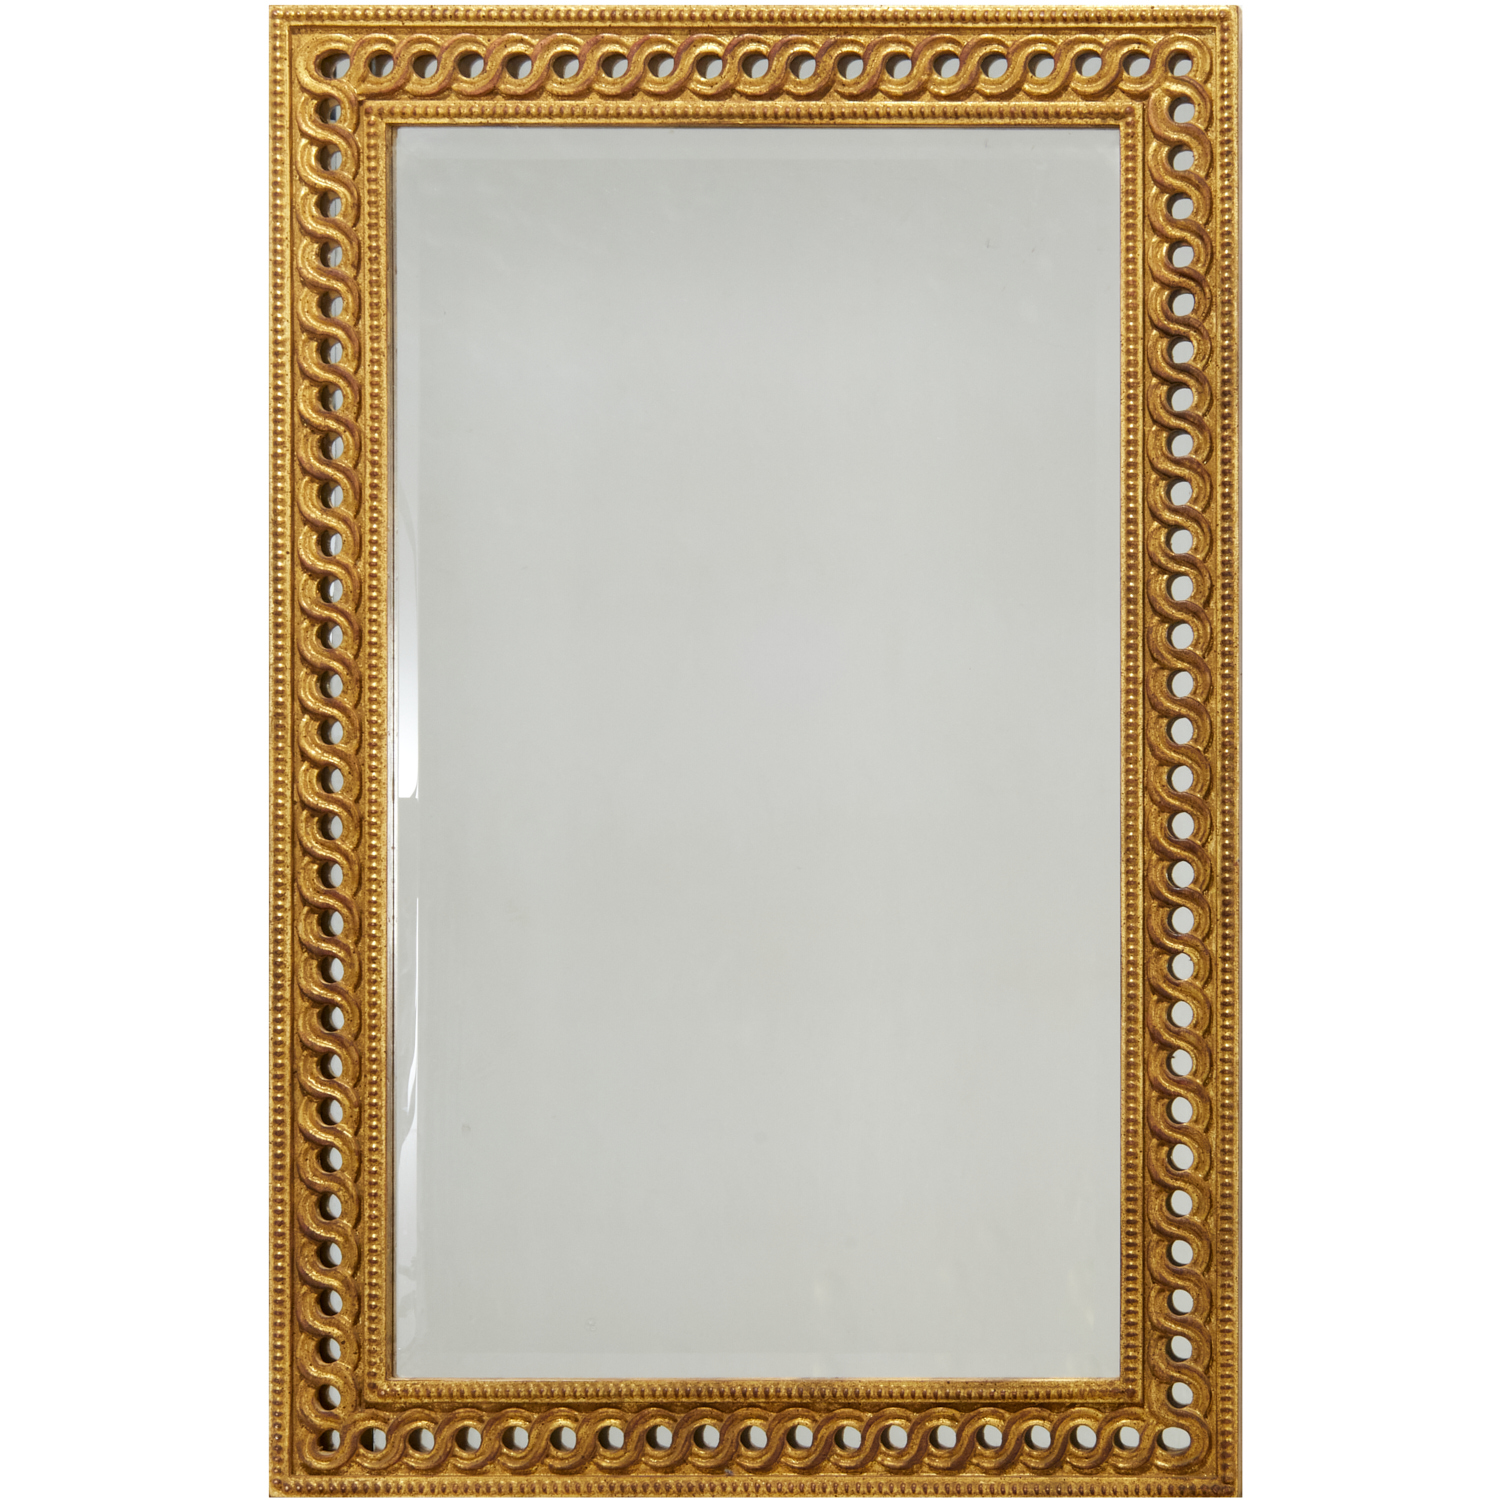 NEO CLASSICAL STYLE GILT WALL MIRROR 30bd58